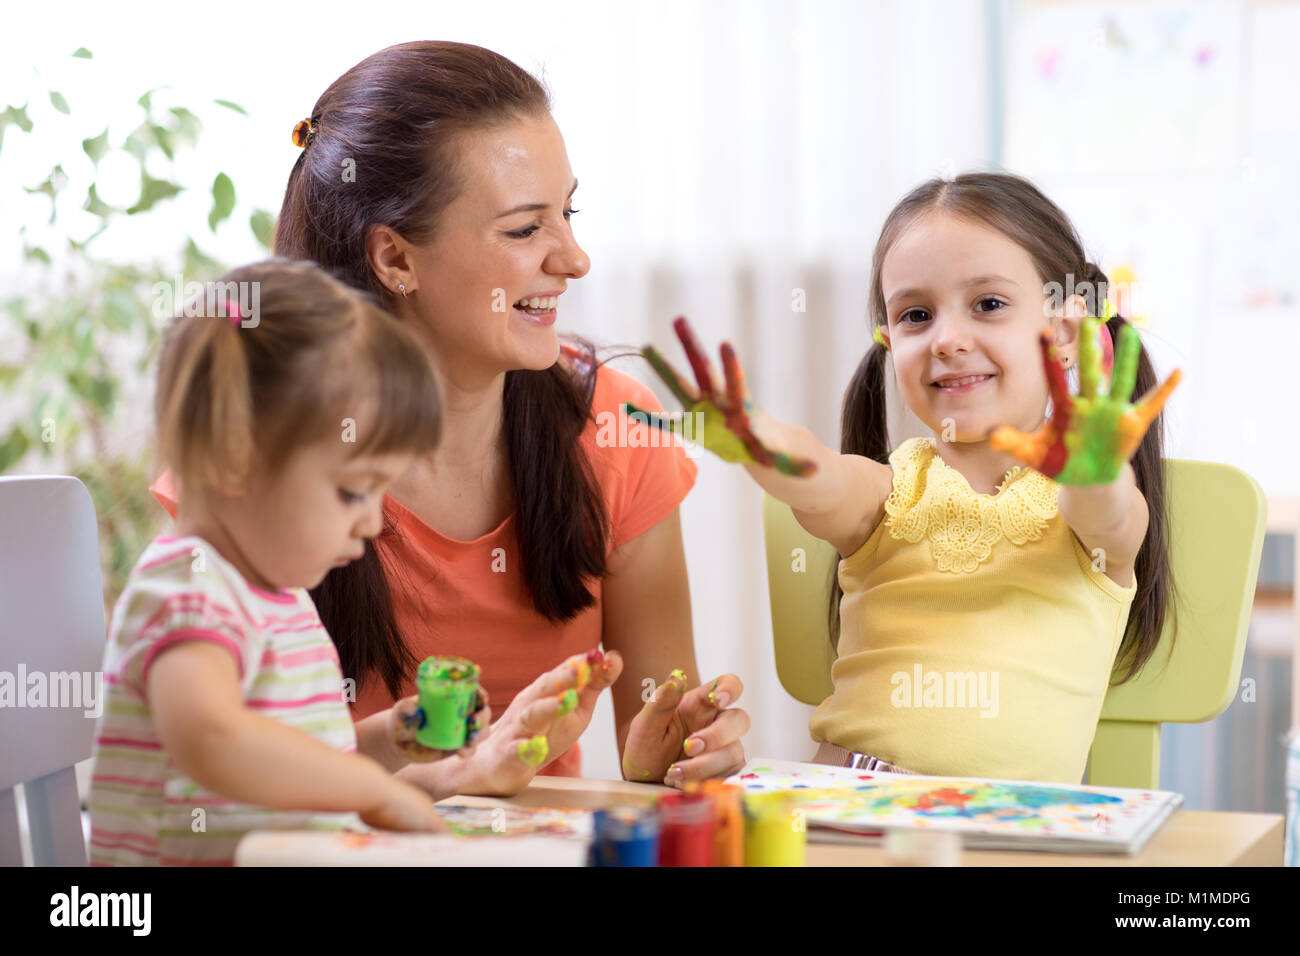 Child girl with painted hands. Kids drawing and coloring with teacher in daycare center or playschool. Stock Photo